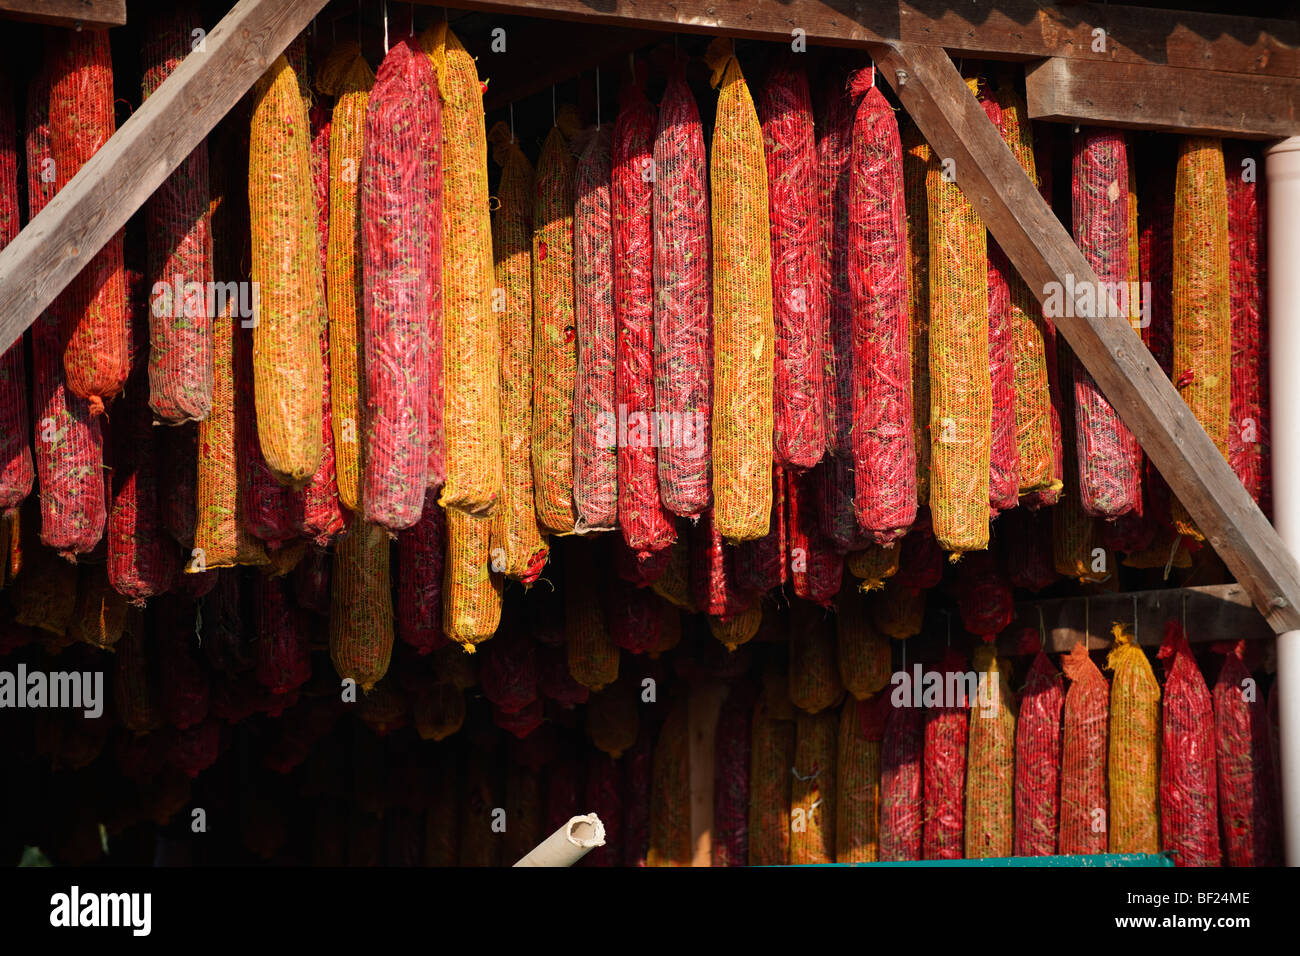 Capsicum annuum or chili peppers air drying to make Hungarian paprika - Kalocsa Hungary Stock Photo